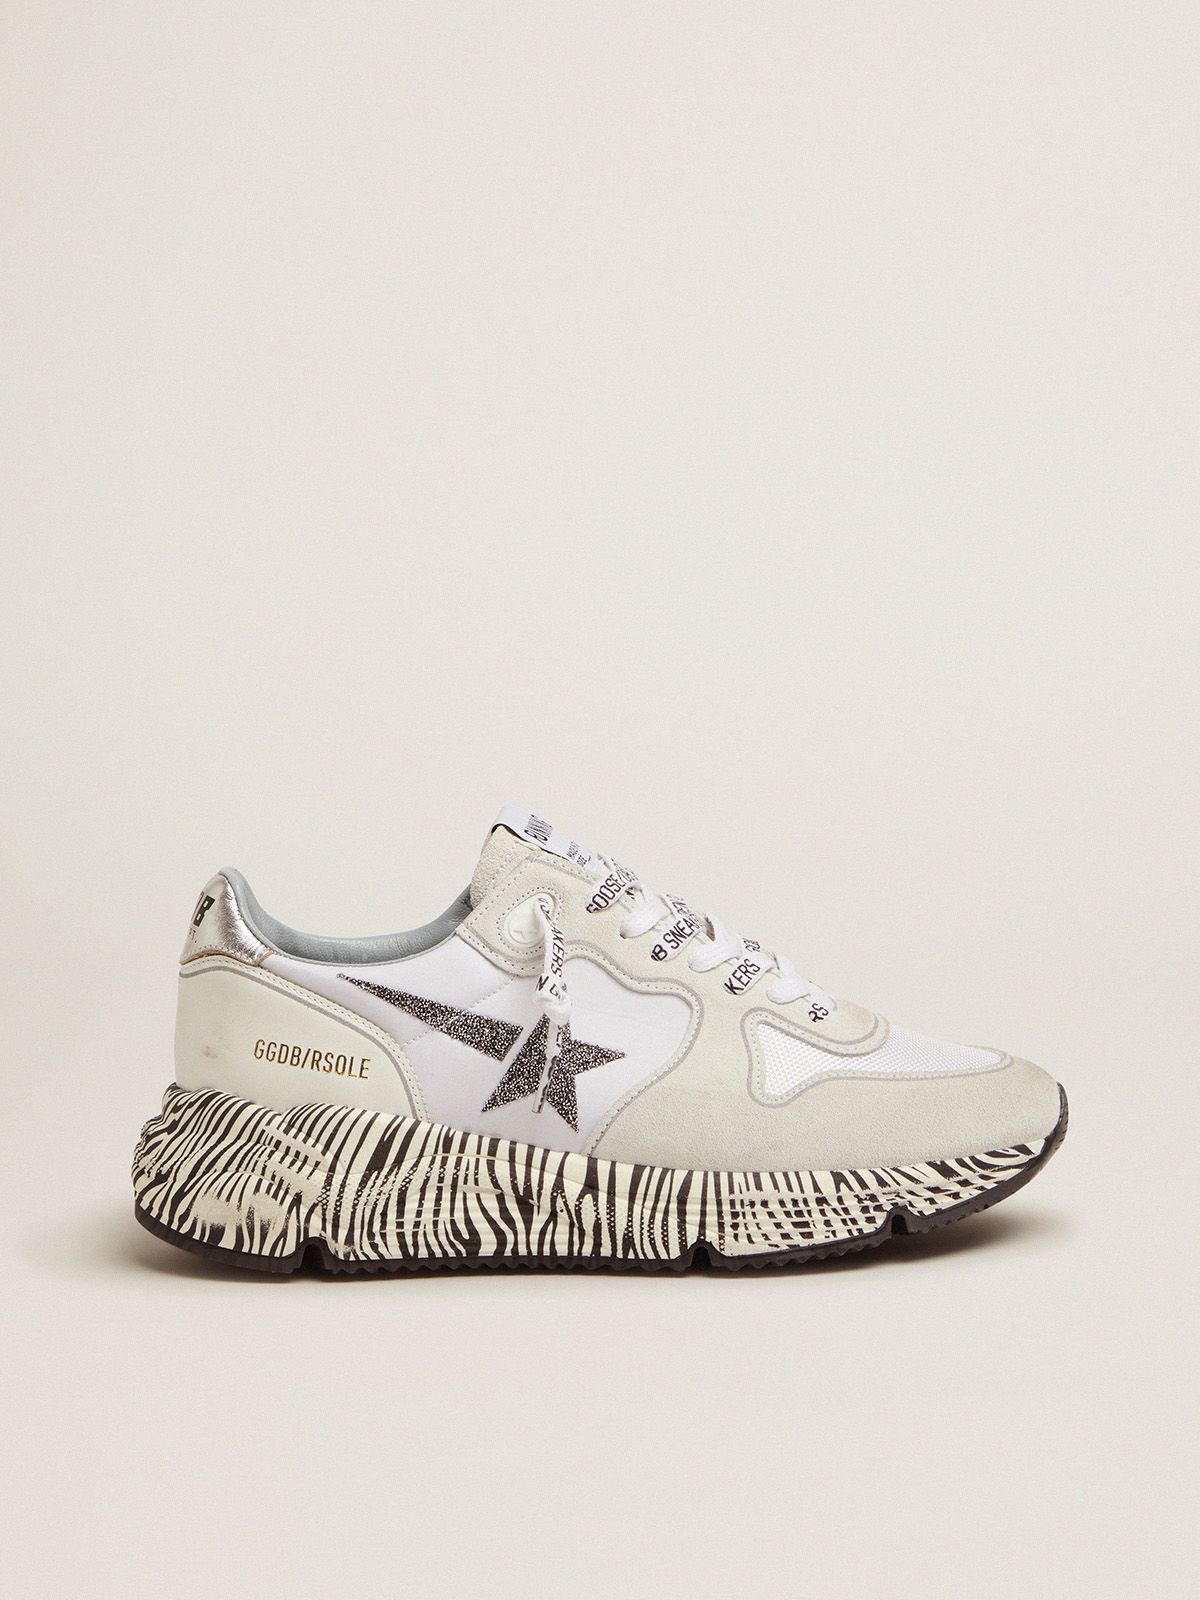 Golden Goose Ball Star Uomo Running Sole sneakers with zebra-print sole and crystals